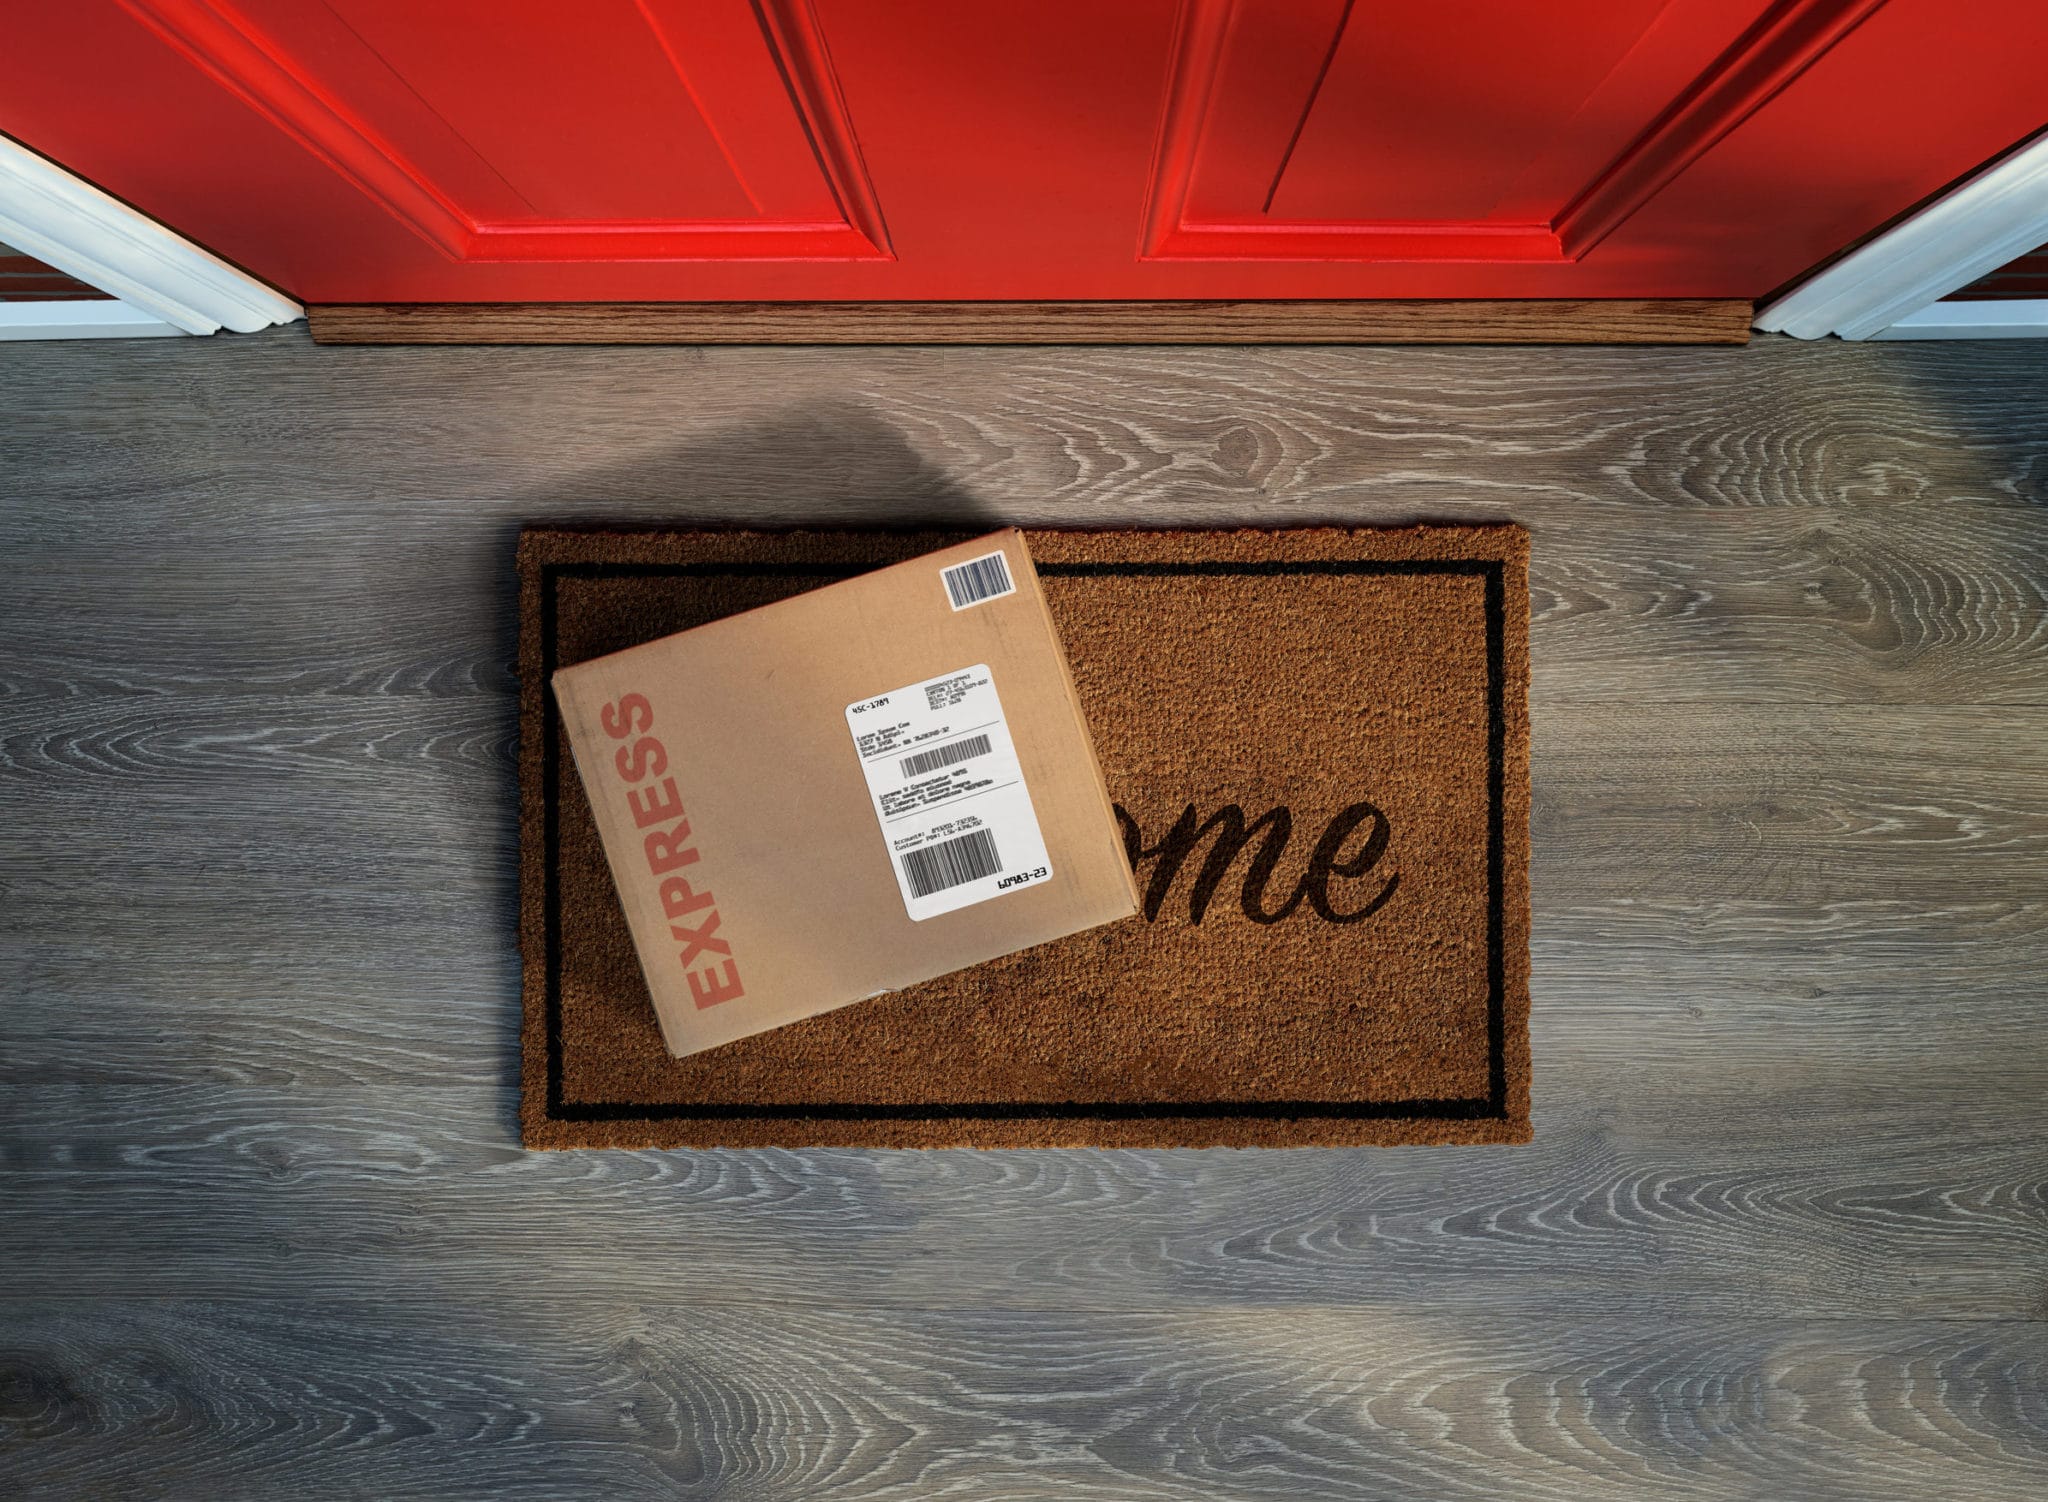 Facing MN Package Theft Charges? Here’s How to Fight Back